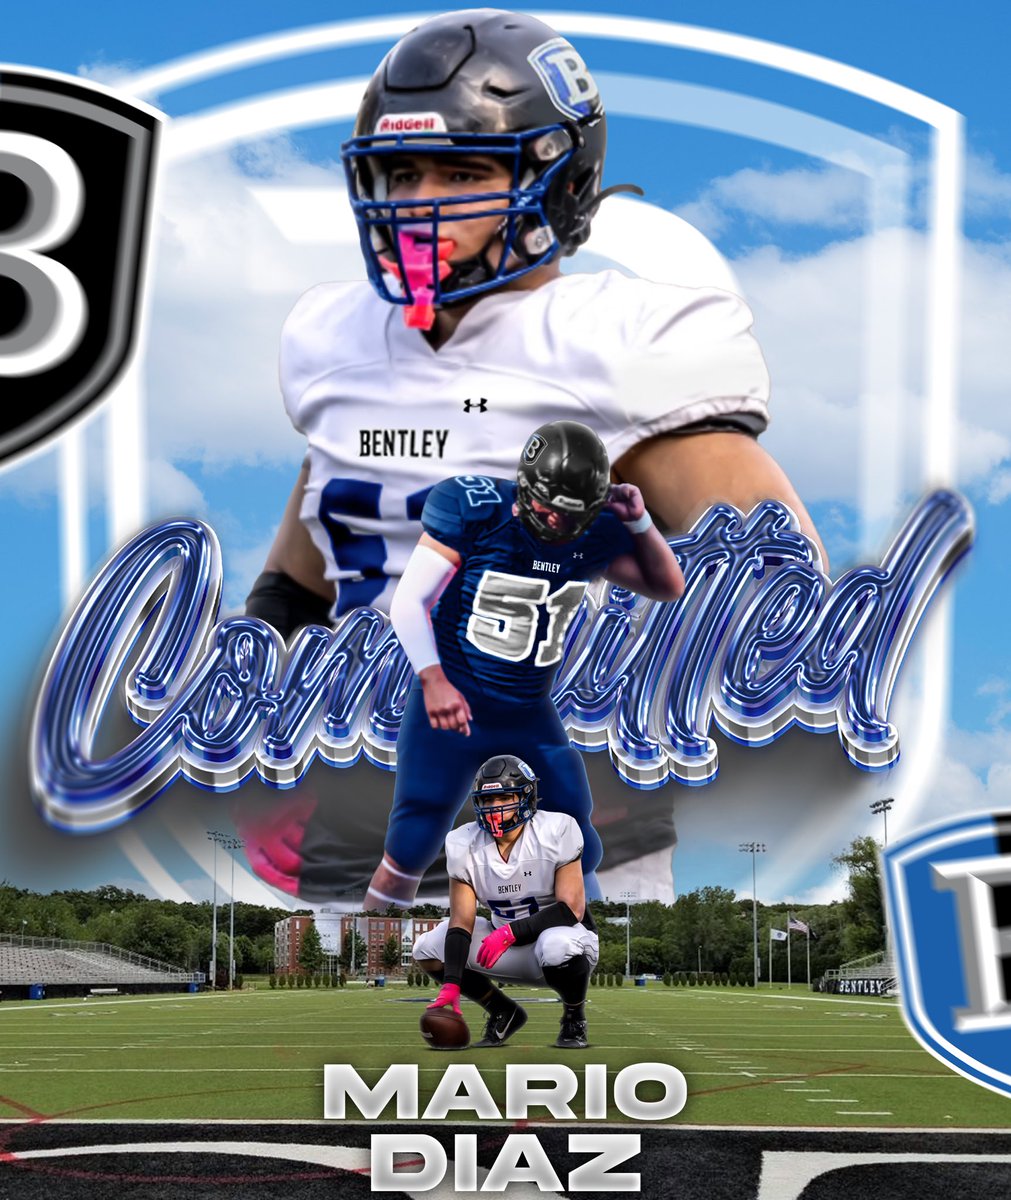 Super Excited to announce I will be furthering my athletic and academic career at Bentley University! Huge thanks to @CJScarpaIII, @CoachLanders1, & @Coach_Thakkar for the amazing opportunity! GO FALCONS💙🤍 @LuHiFootball @creno7